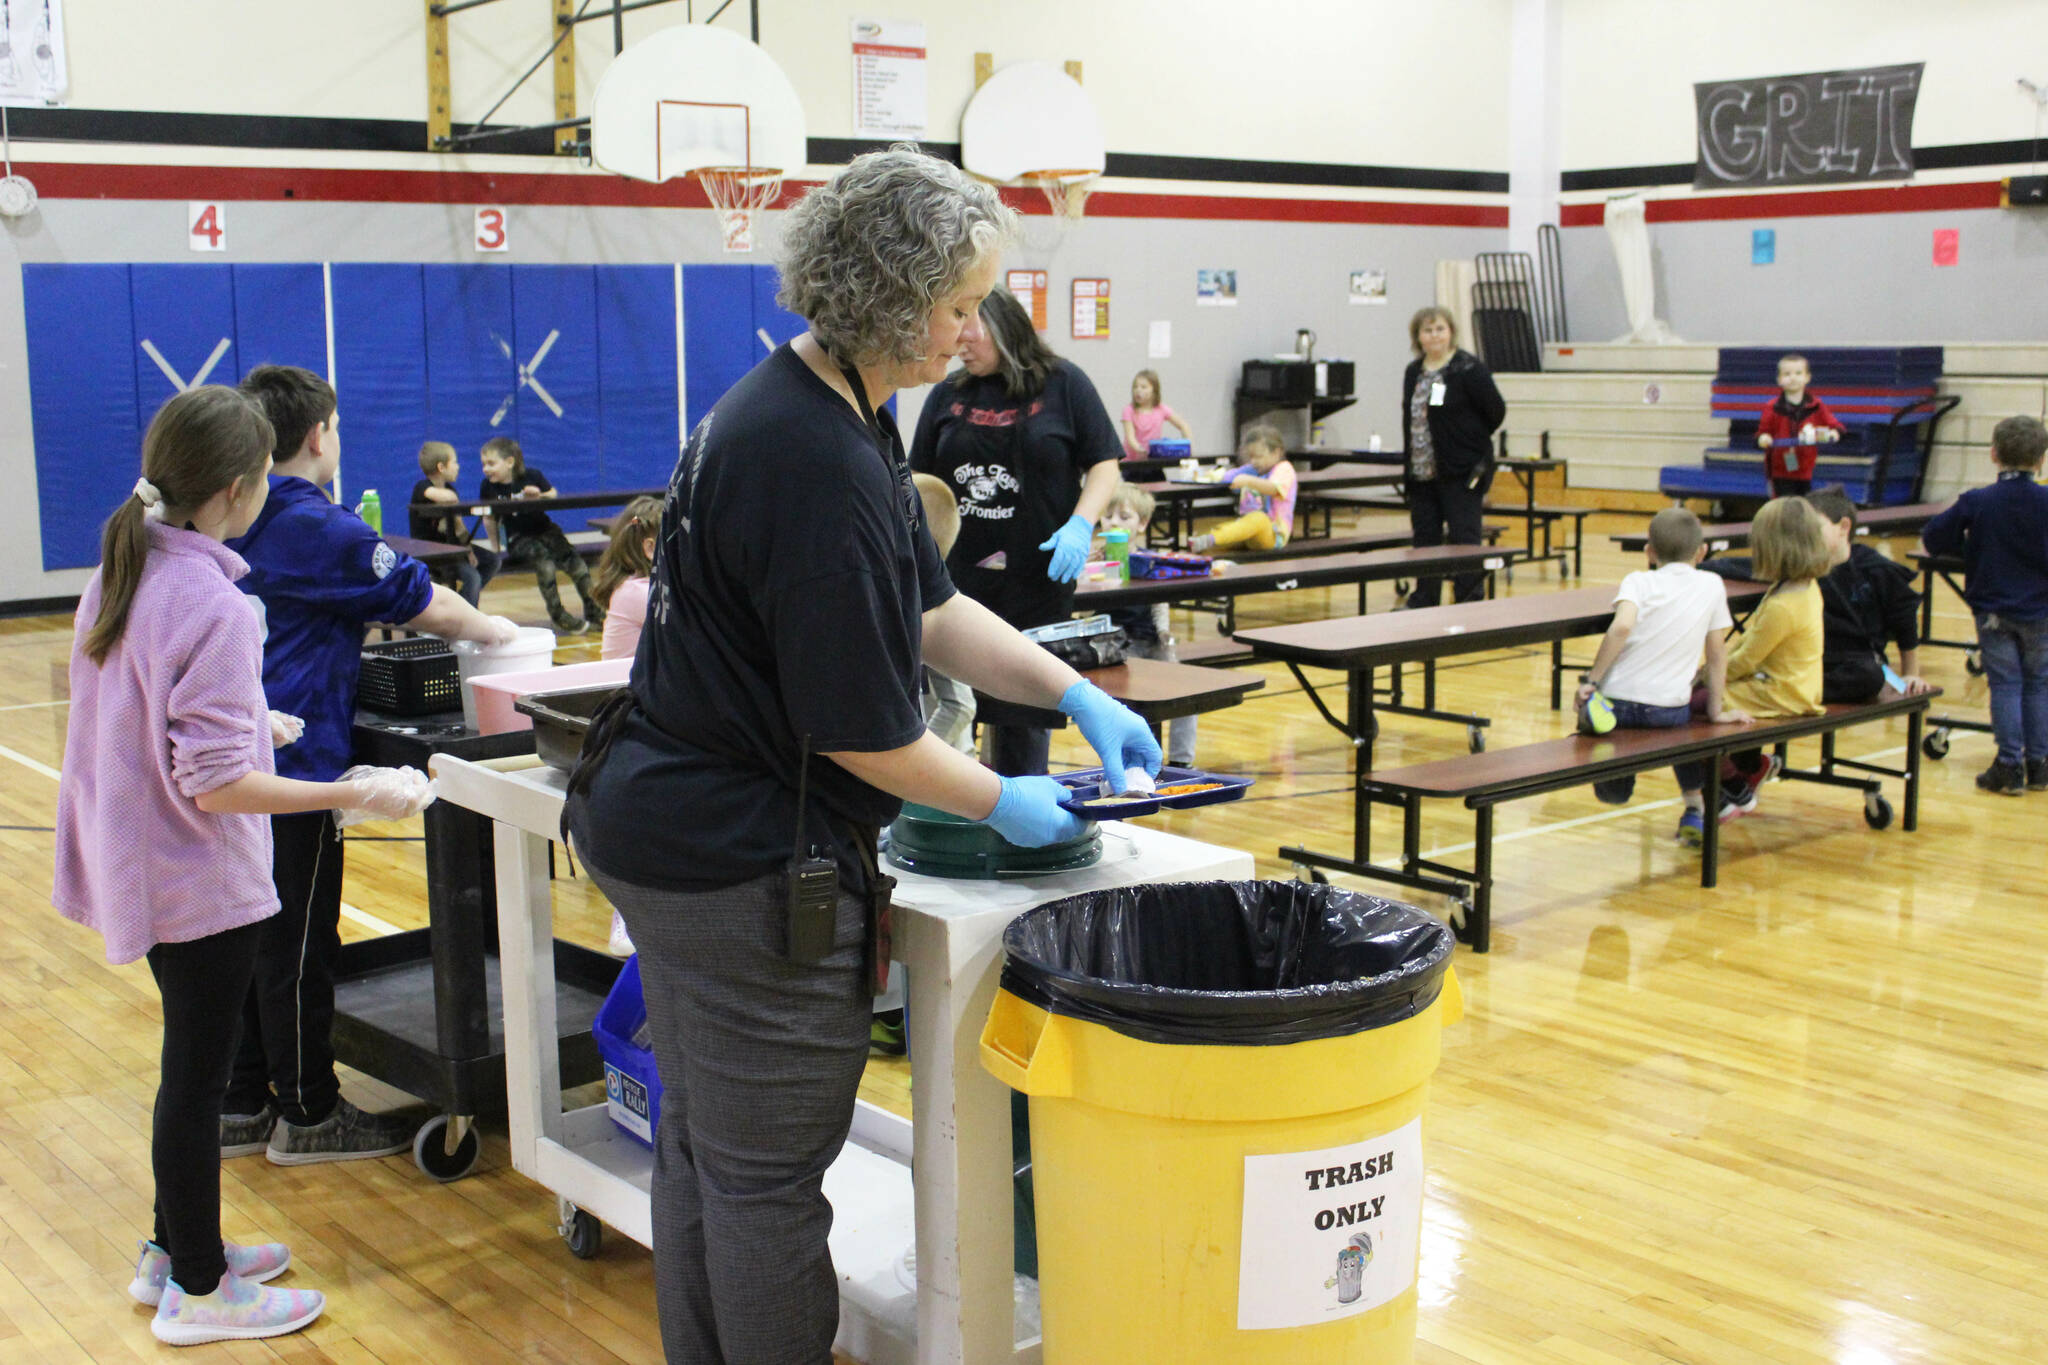 Principal Denise Kelly helps students dispose of lunch materials at Sterling Elementary School on Thursday, Nov. 10, 2022, in Sterling, Alaska. (Ashlyn O’Hara/Peninsula Clarion)